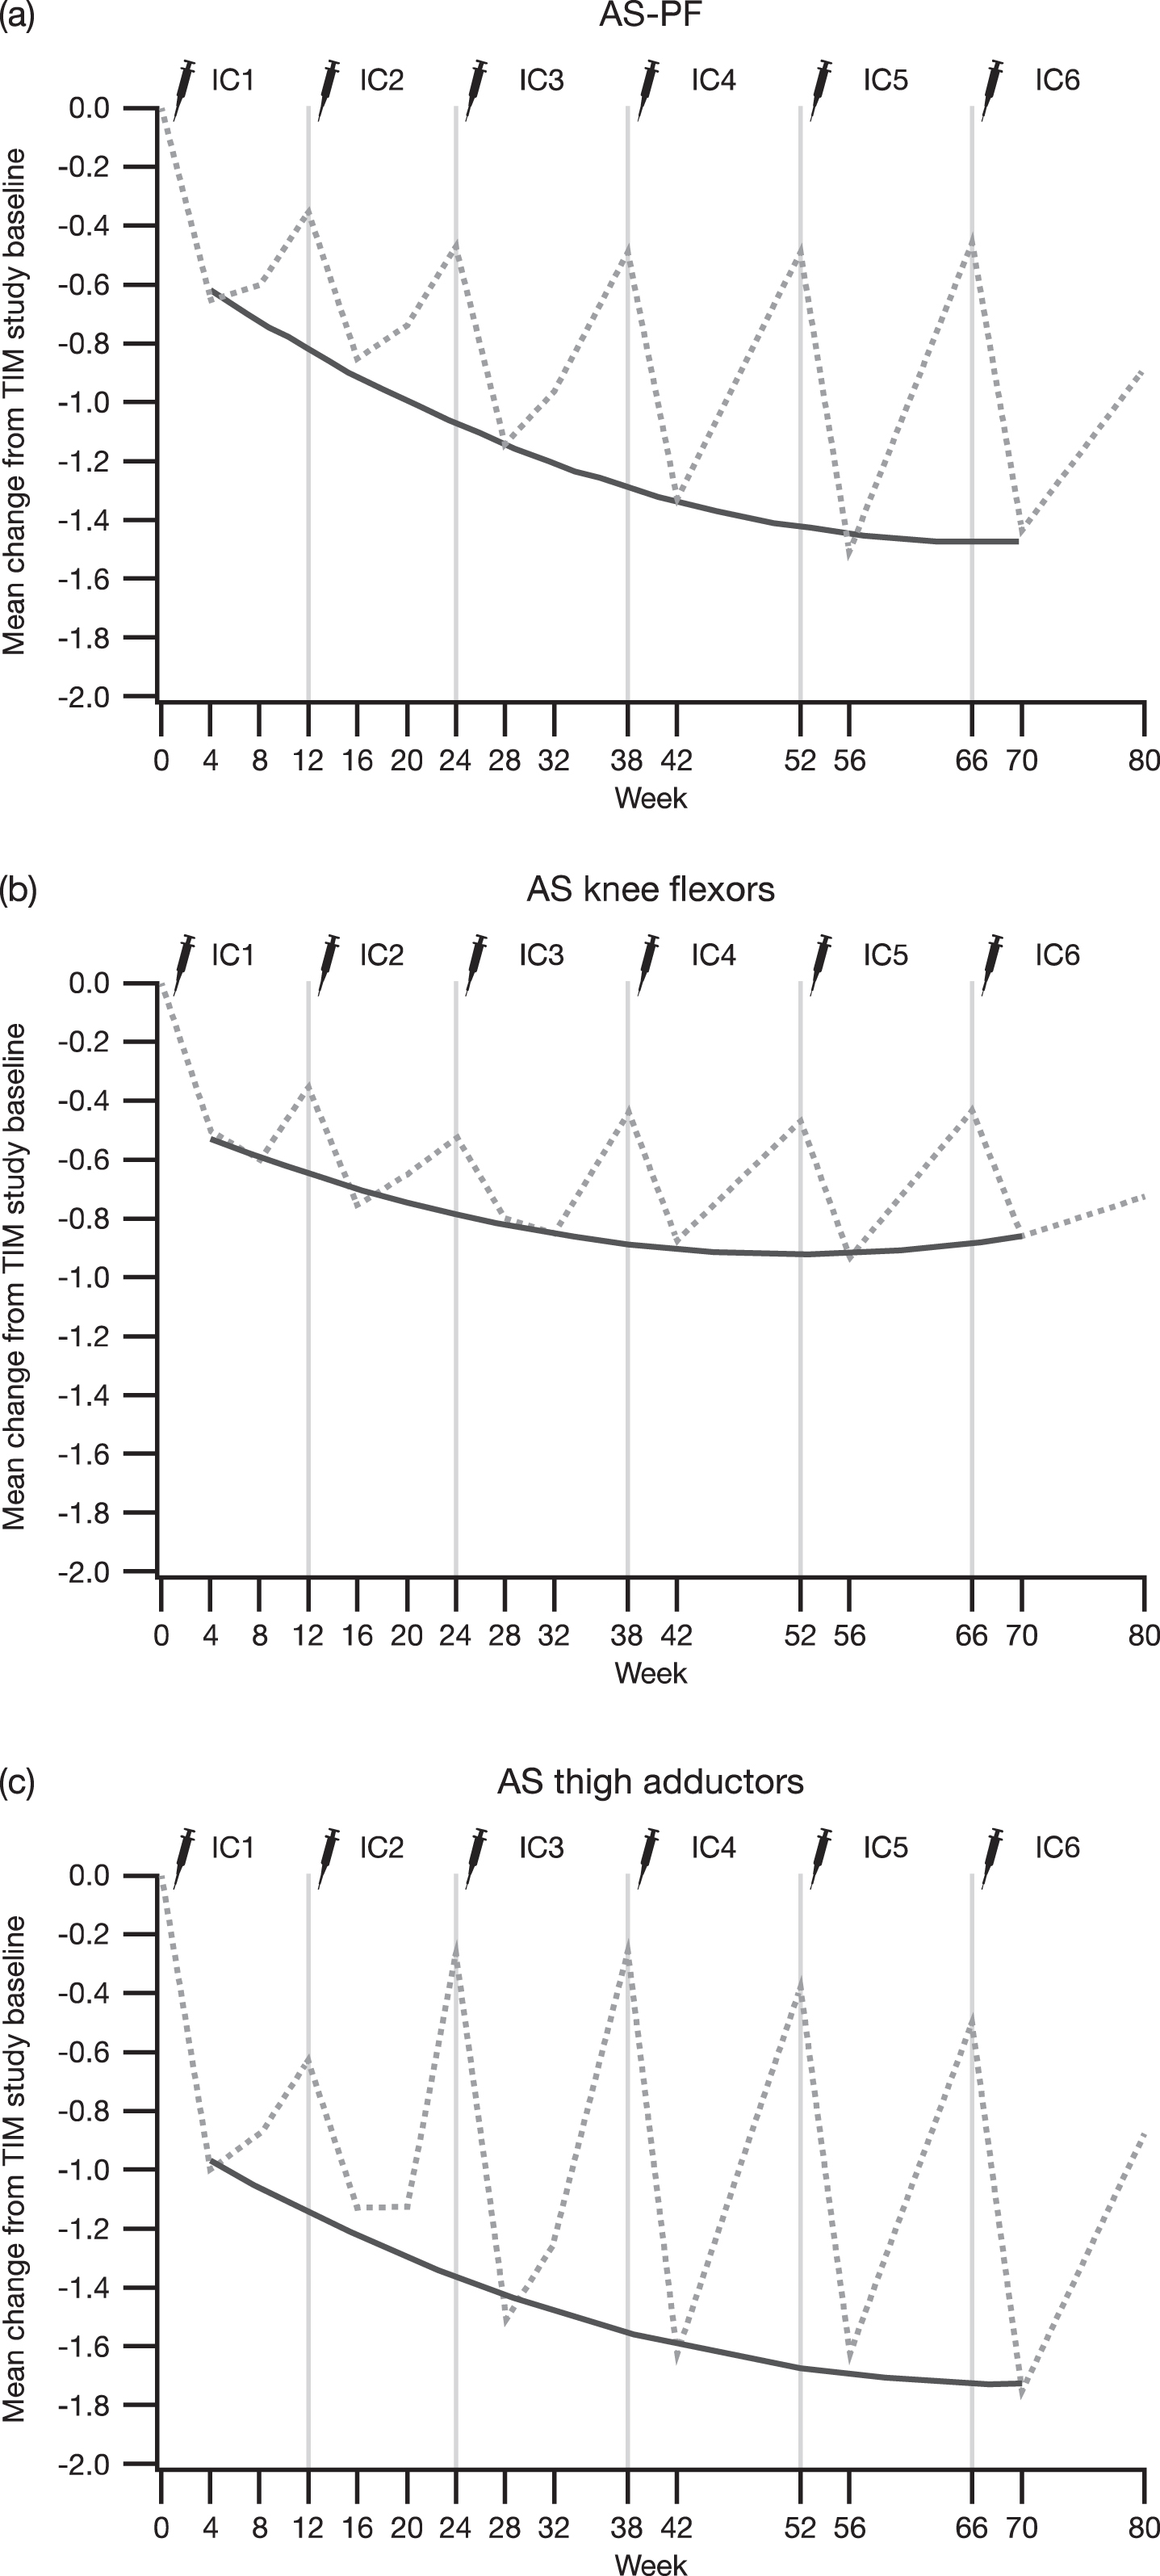 Change in AS scores of the (a) plantar flexors, (b) knee flexors, and (c) thigh adductors from the TIM study baseline to 4 weeks post-each injection cycle in patients who were treated in TIM and continued into TIMO for a total of six incobotulinumtoxinA injection cycles; FAS, OC. Dashed lines represent the mean change in AS score from the TIM study baseline at each visit, and the solid lines represent the quadratic regression of AS score changes from the TIM study baseline to week 4 in each injection cycle on scheduled time in weeks. AS = Ashworth Scale; AS-PF = Ashworth Scale of the plantar flexors; CHG = change; FAS = full analysis set; OC = observed cases; TIM = Treatment with IncobotulinumtoxinA in Movement study; TIMO, Treatment with IncobotulinumtoxinA in Movement Open-Label study.